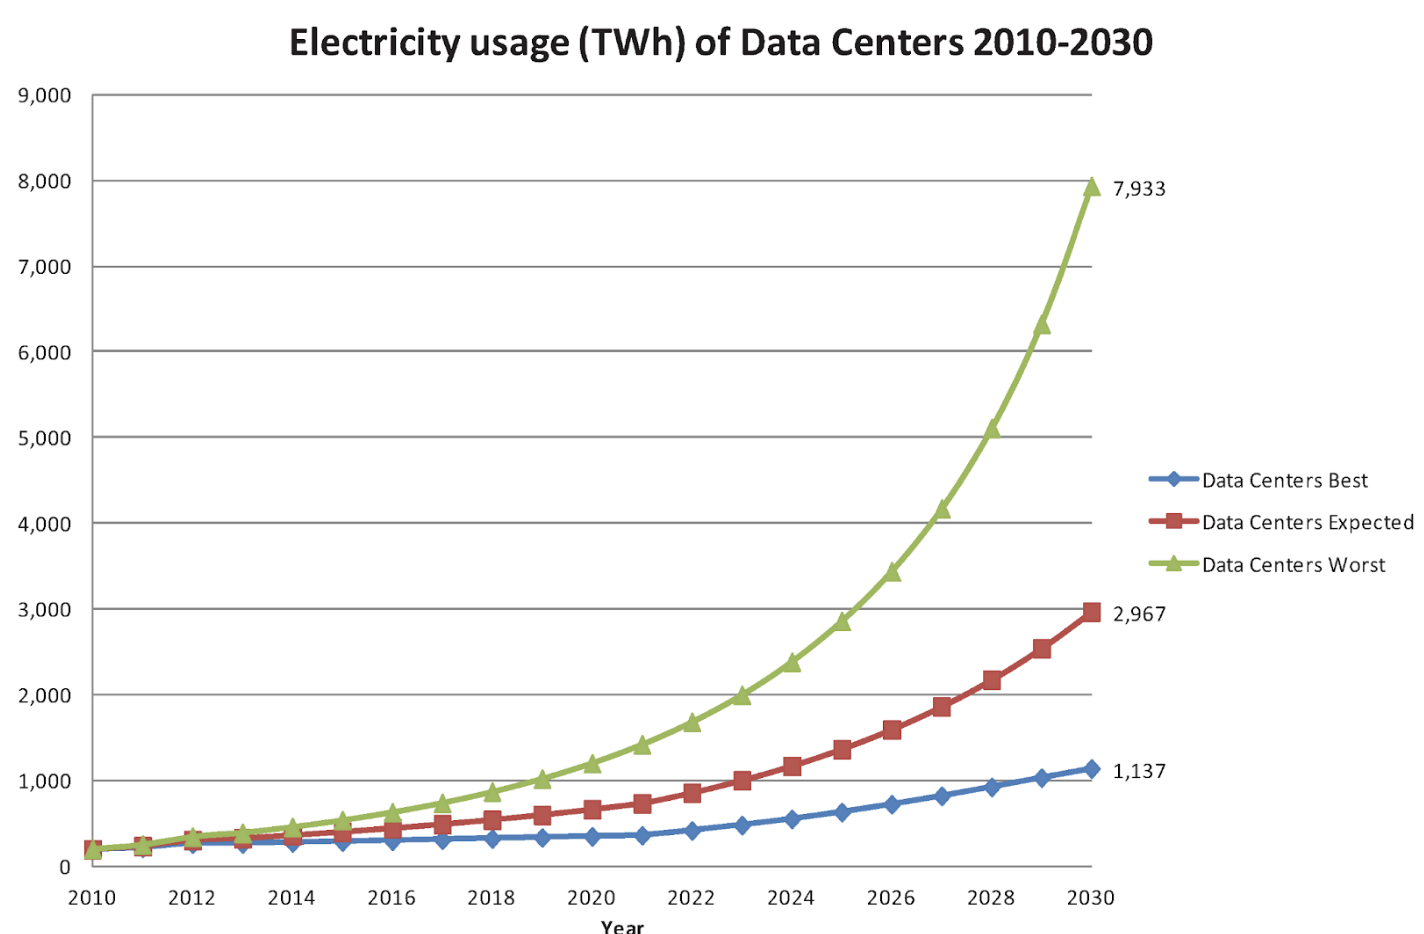 A graph showing the escalating use of electricity by data centers between 2010 and 2030. In each case, the usage is exponentially higher as time progresses.